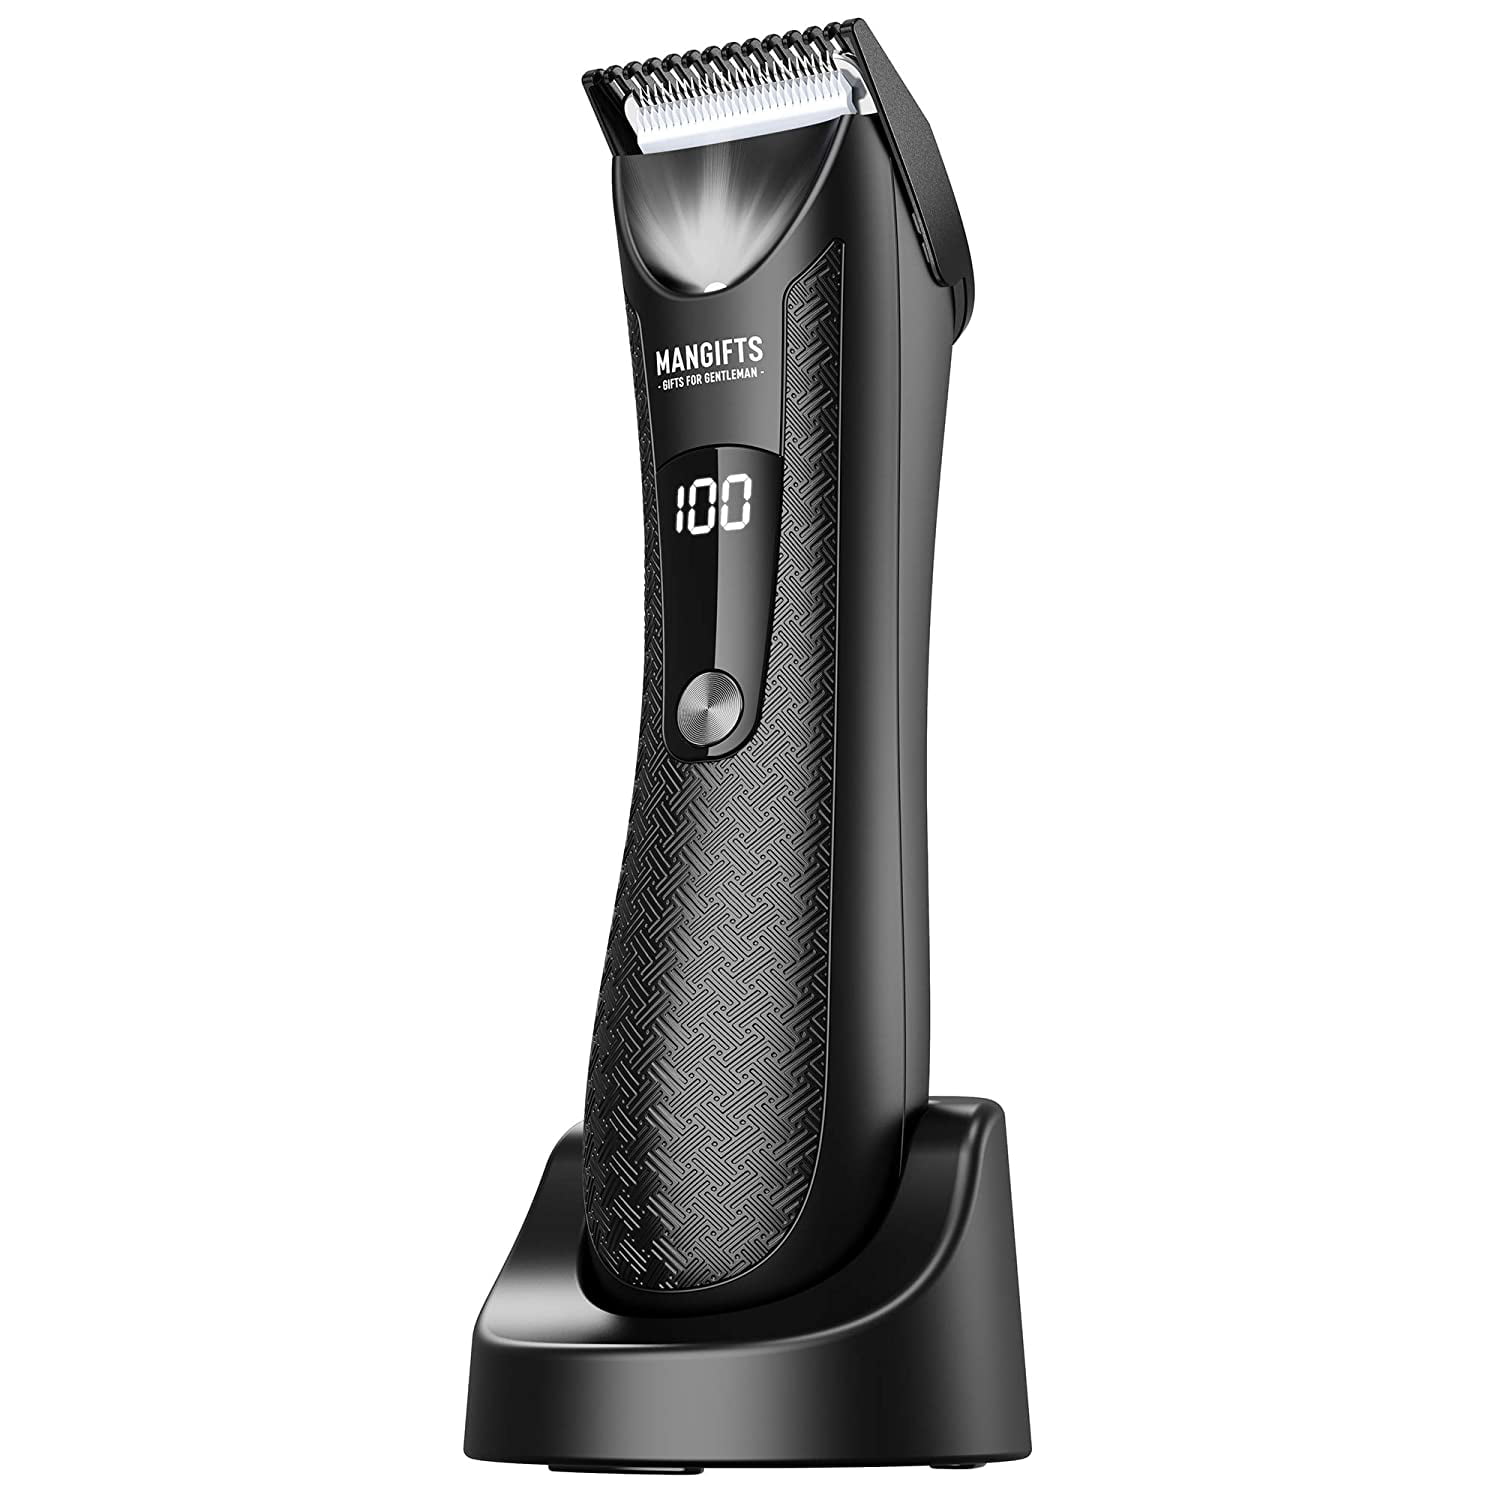 Pubic Hair Trimmer for Men,Updated Professional Groin Body Trimmer with LED  Display,Replaceable Ceramic Blade Heads,Showerproof Wet/Dry Clippers,Charging  Dock,Ultimate Male Hygiene Razor 